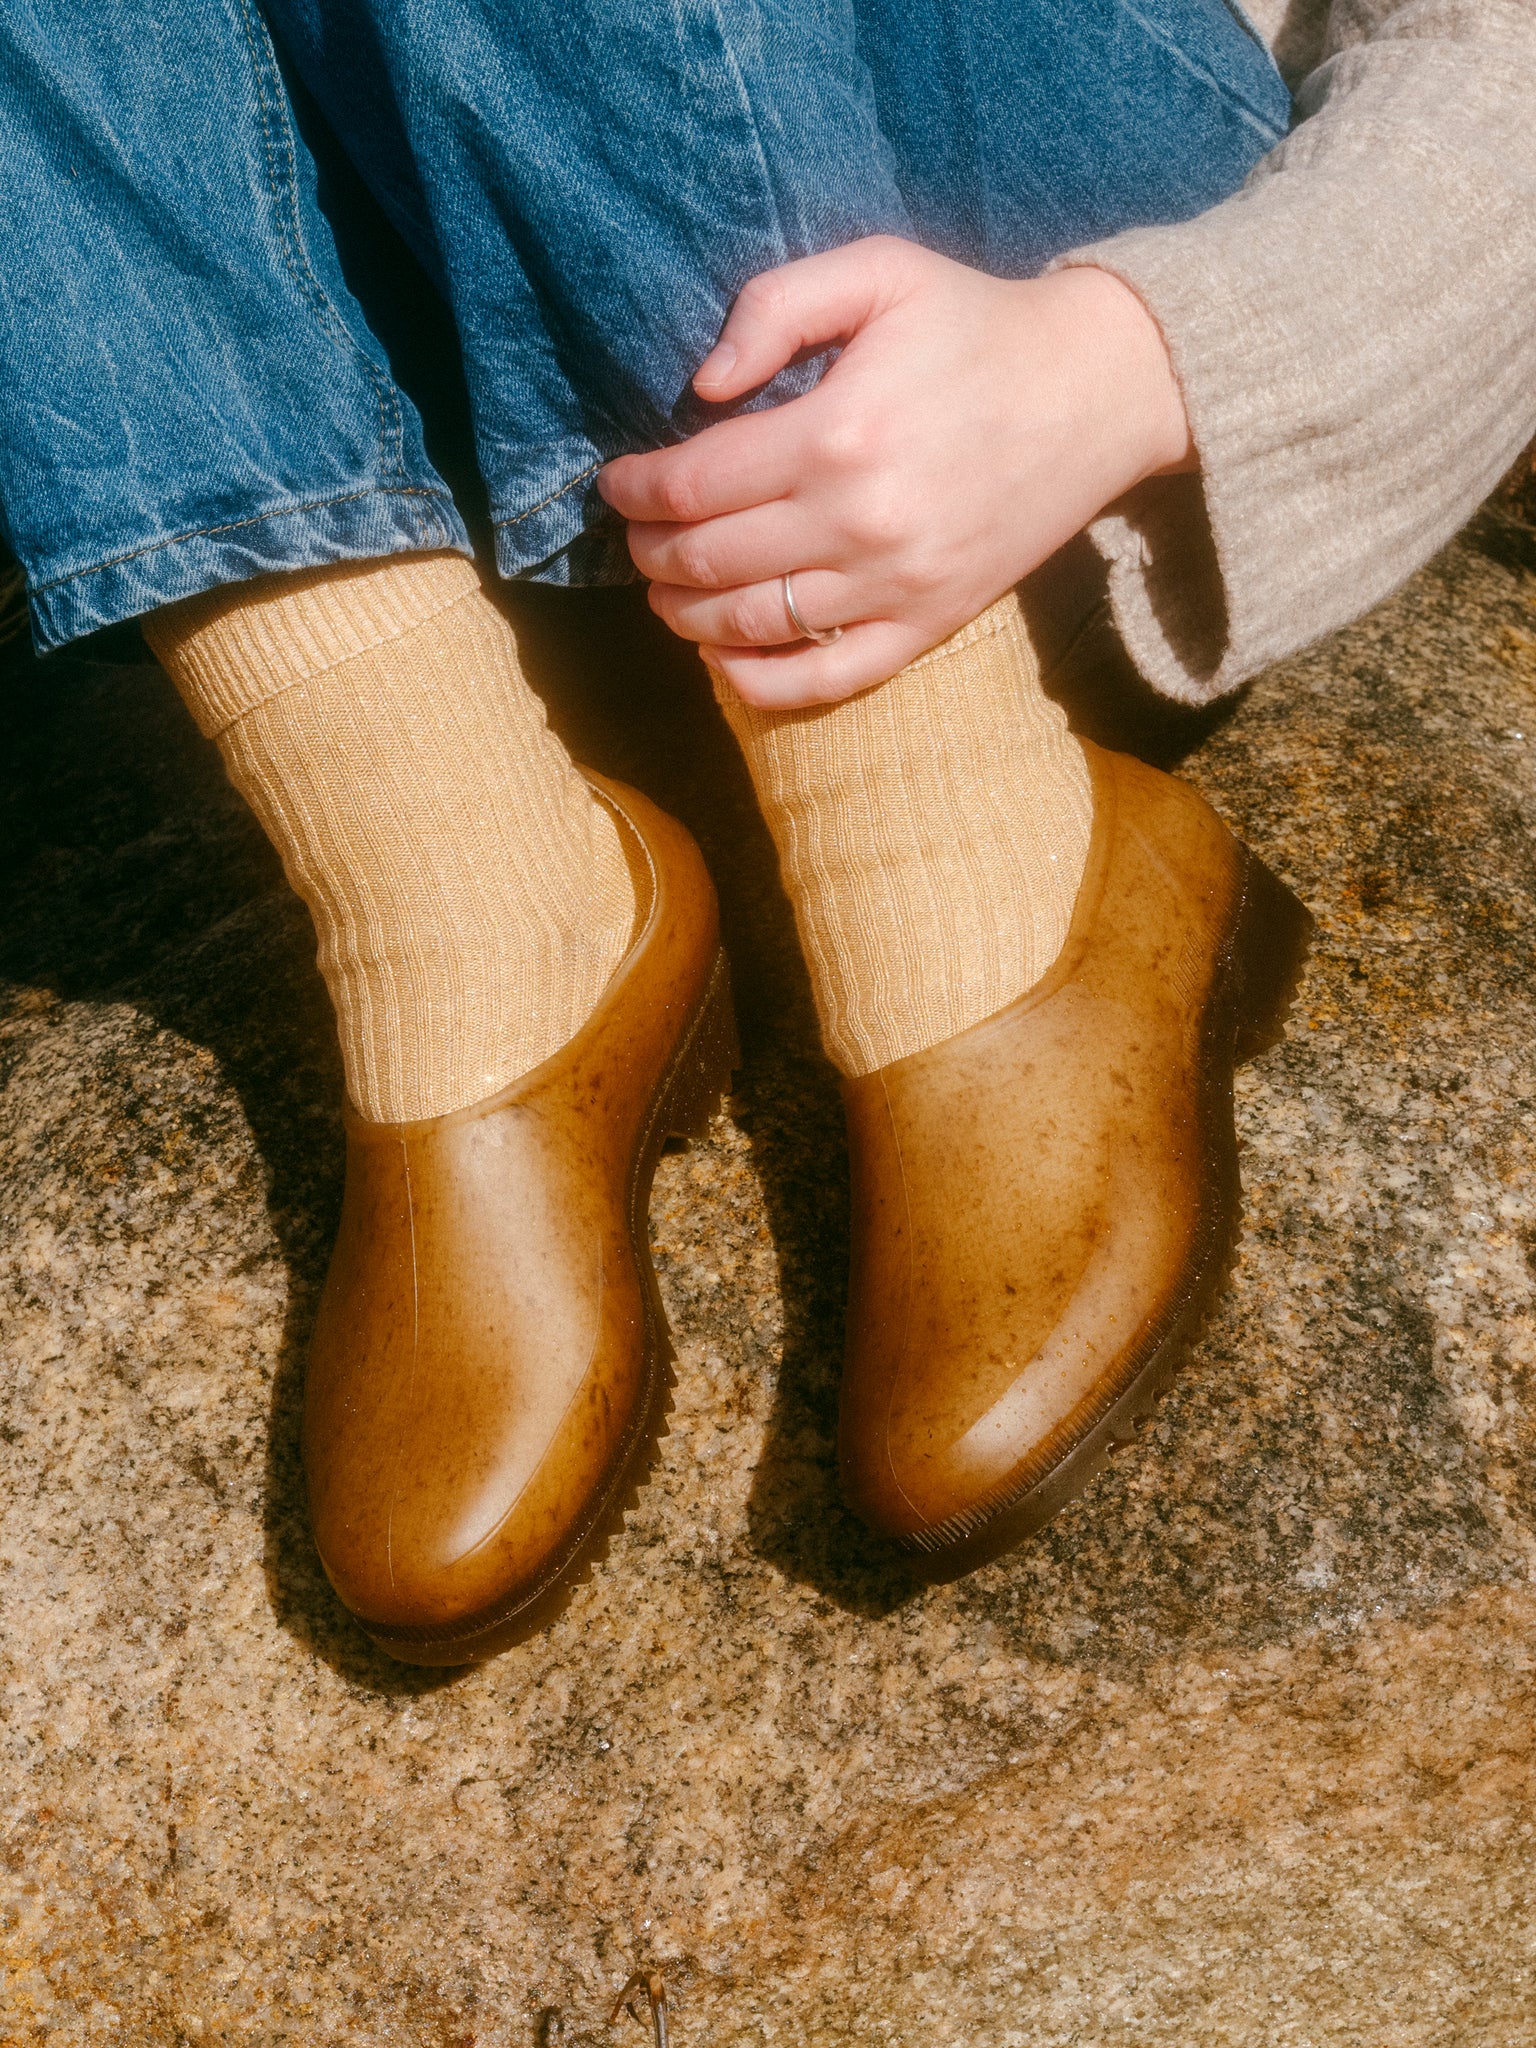 French Recycled Hemp Gardening Clogs in Sepia – The Post Supply